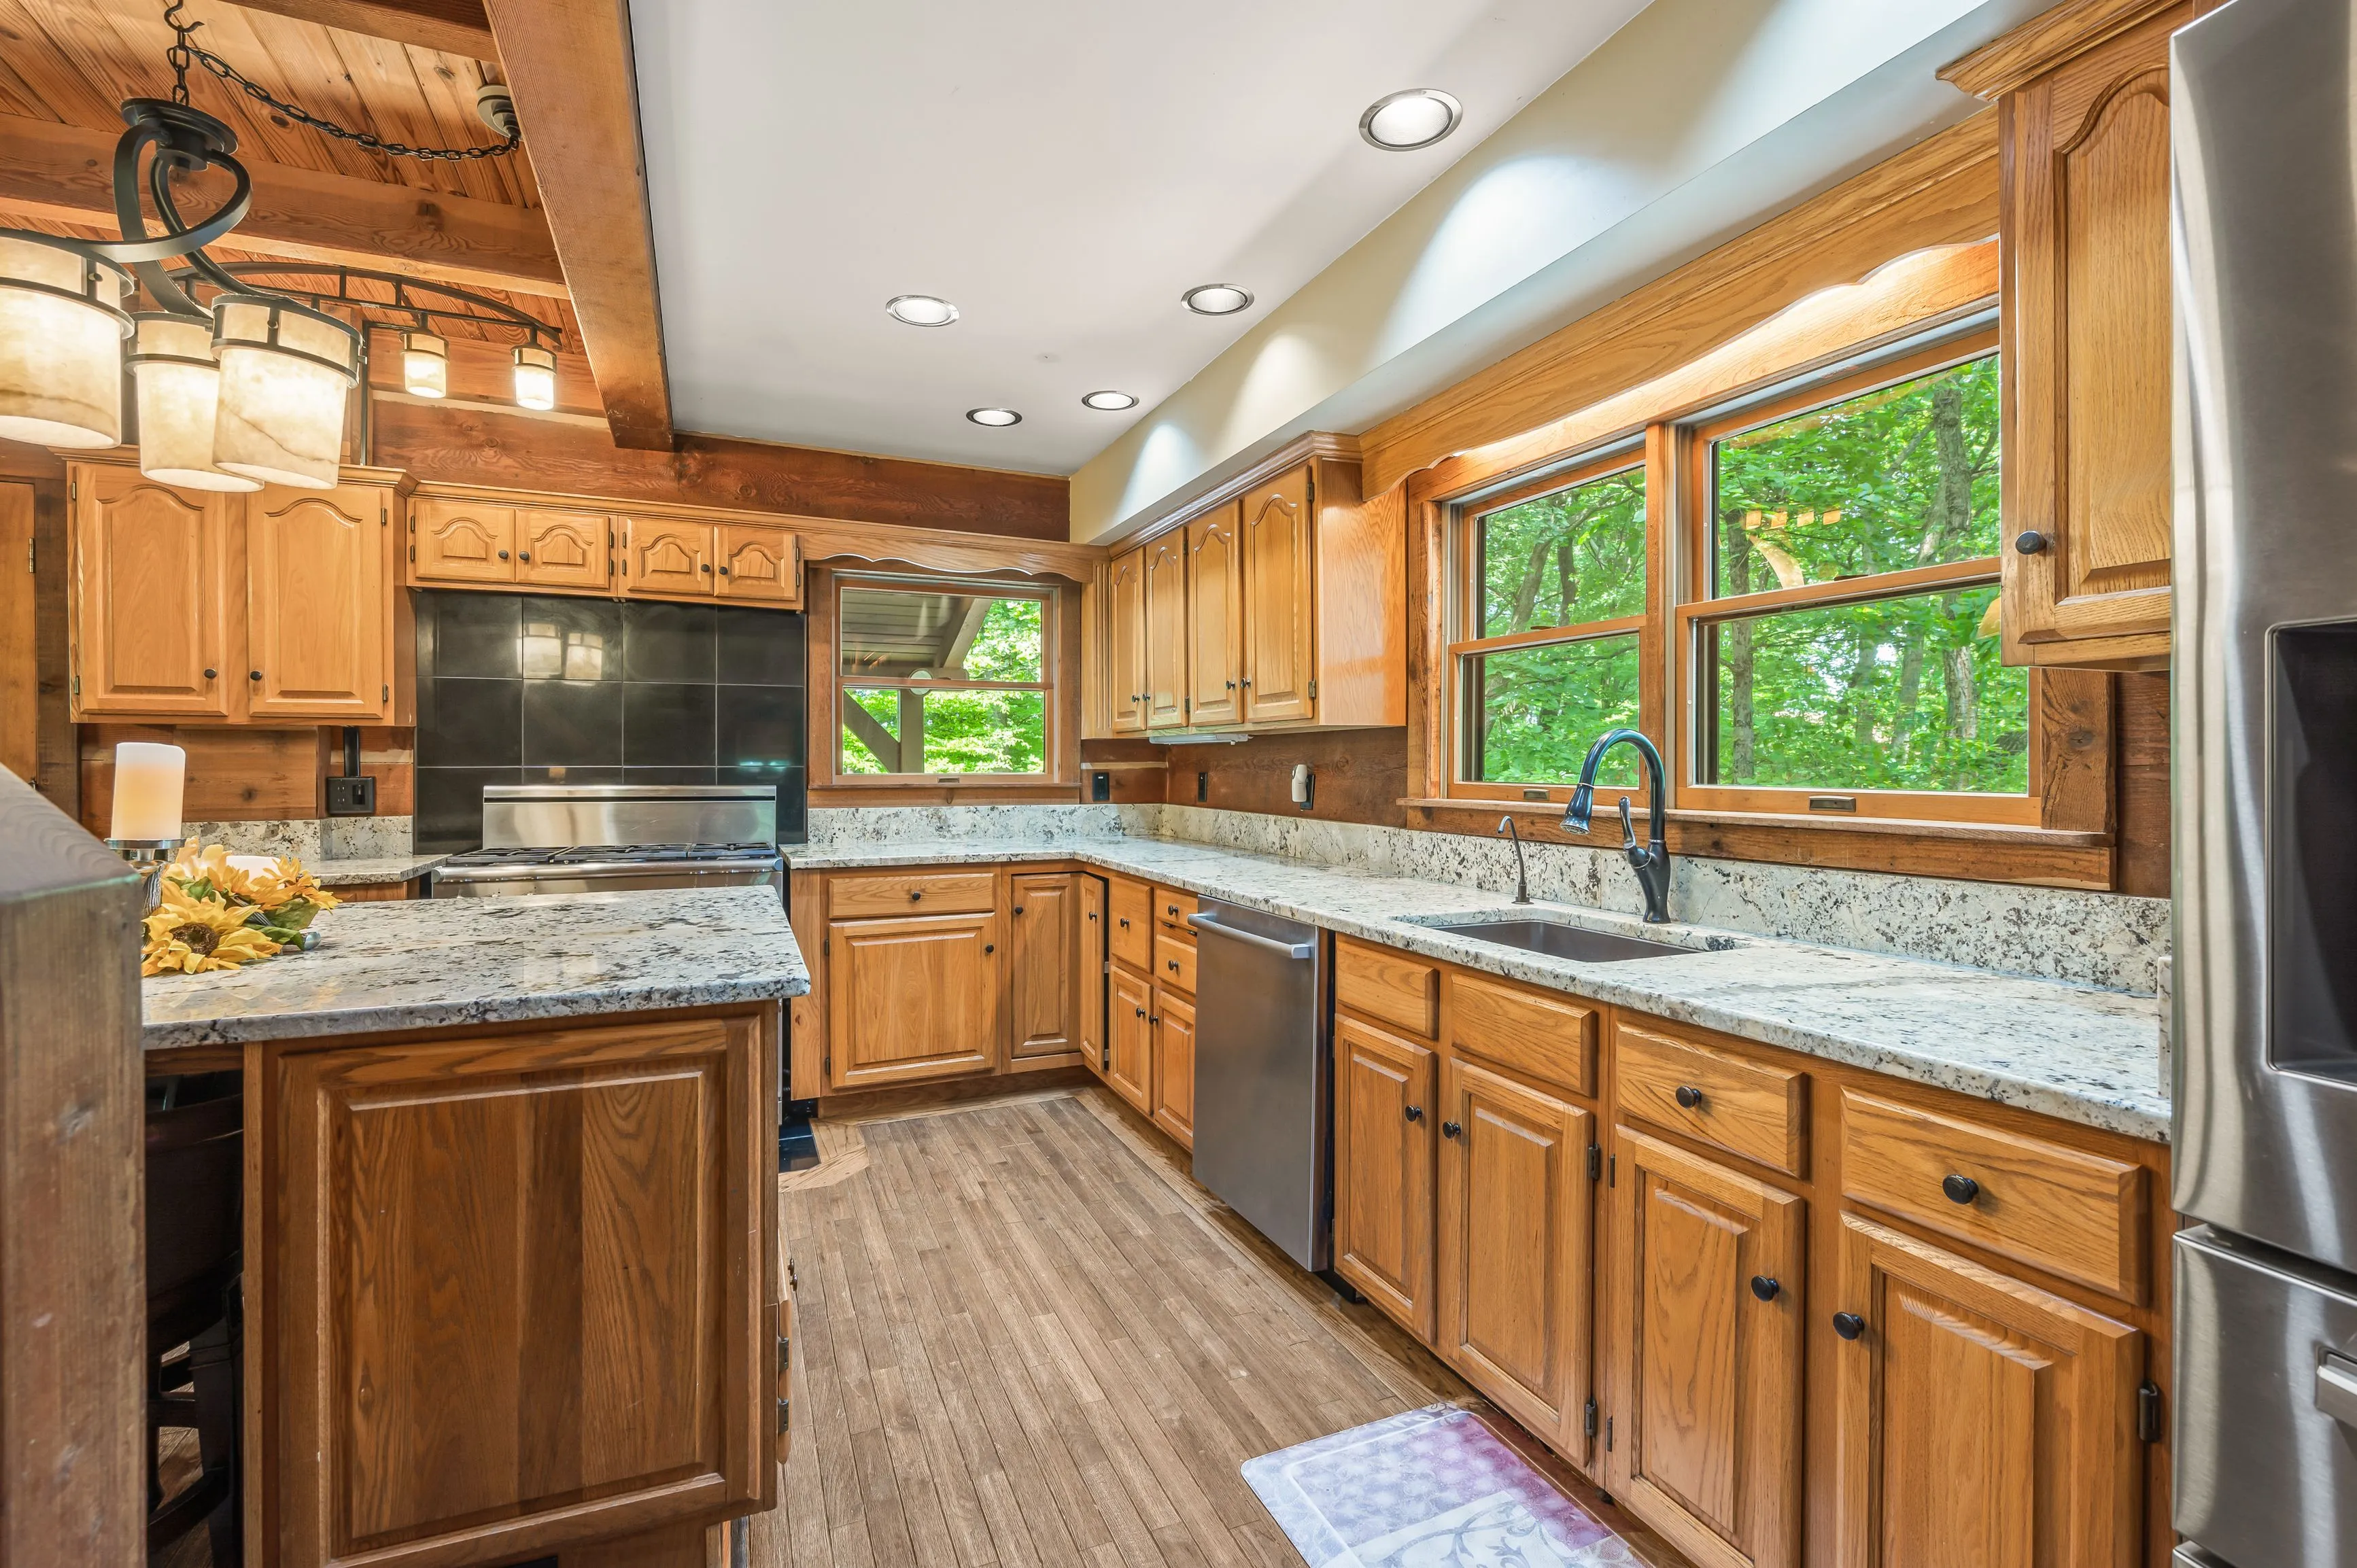 A bright, modern kitchen with wooden cabinets, granite countertops, and stainless steel appliances, surrounded by windows overlooking greenery.